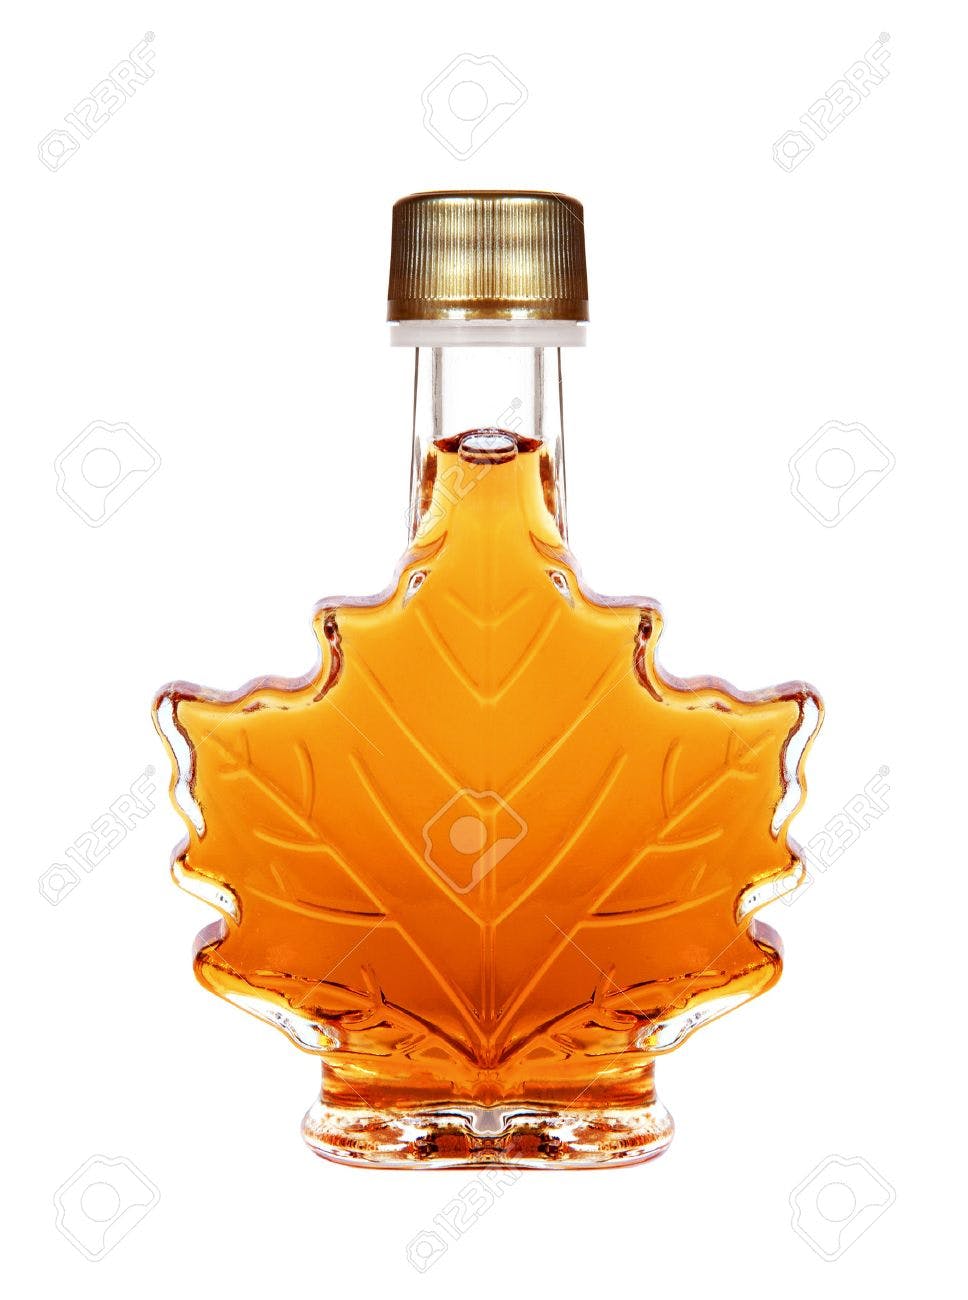 maple syrup or honey